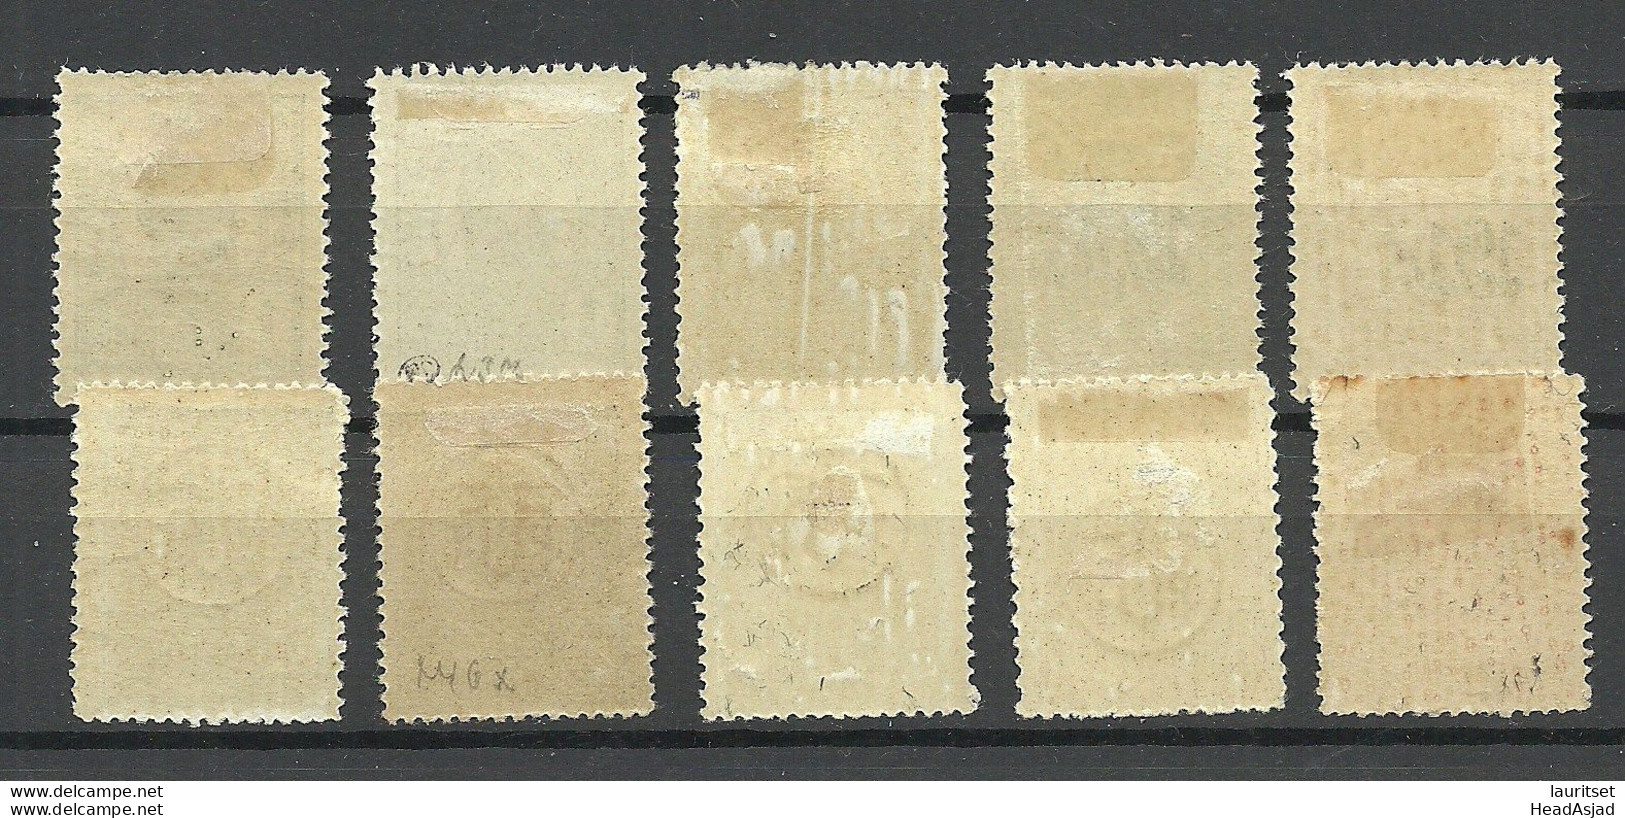 ROMANIA ROMANA 1918 Lot Stamps From Michel 237 - 239 * & 248 - 50 * Incl. Paper Types - Neufs